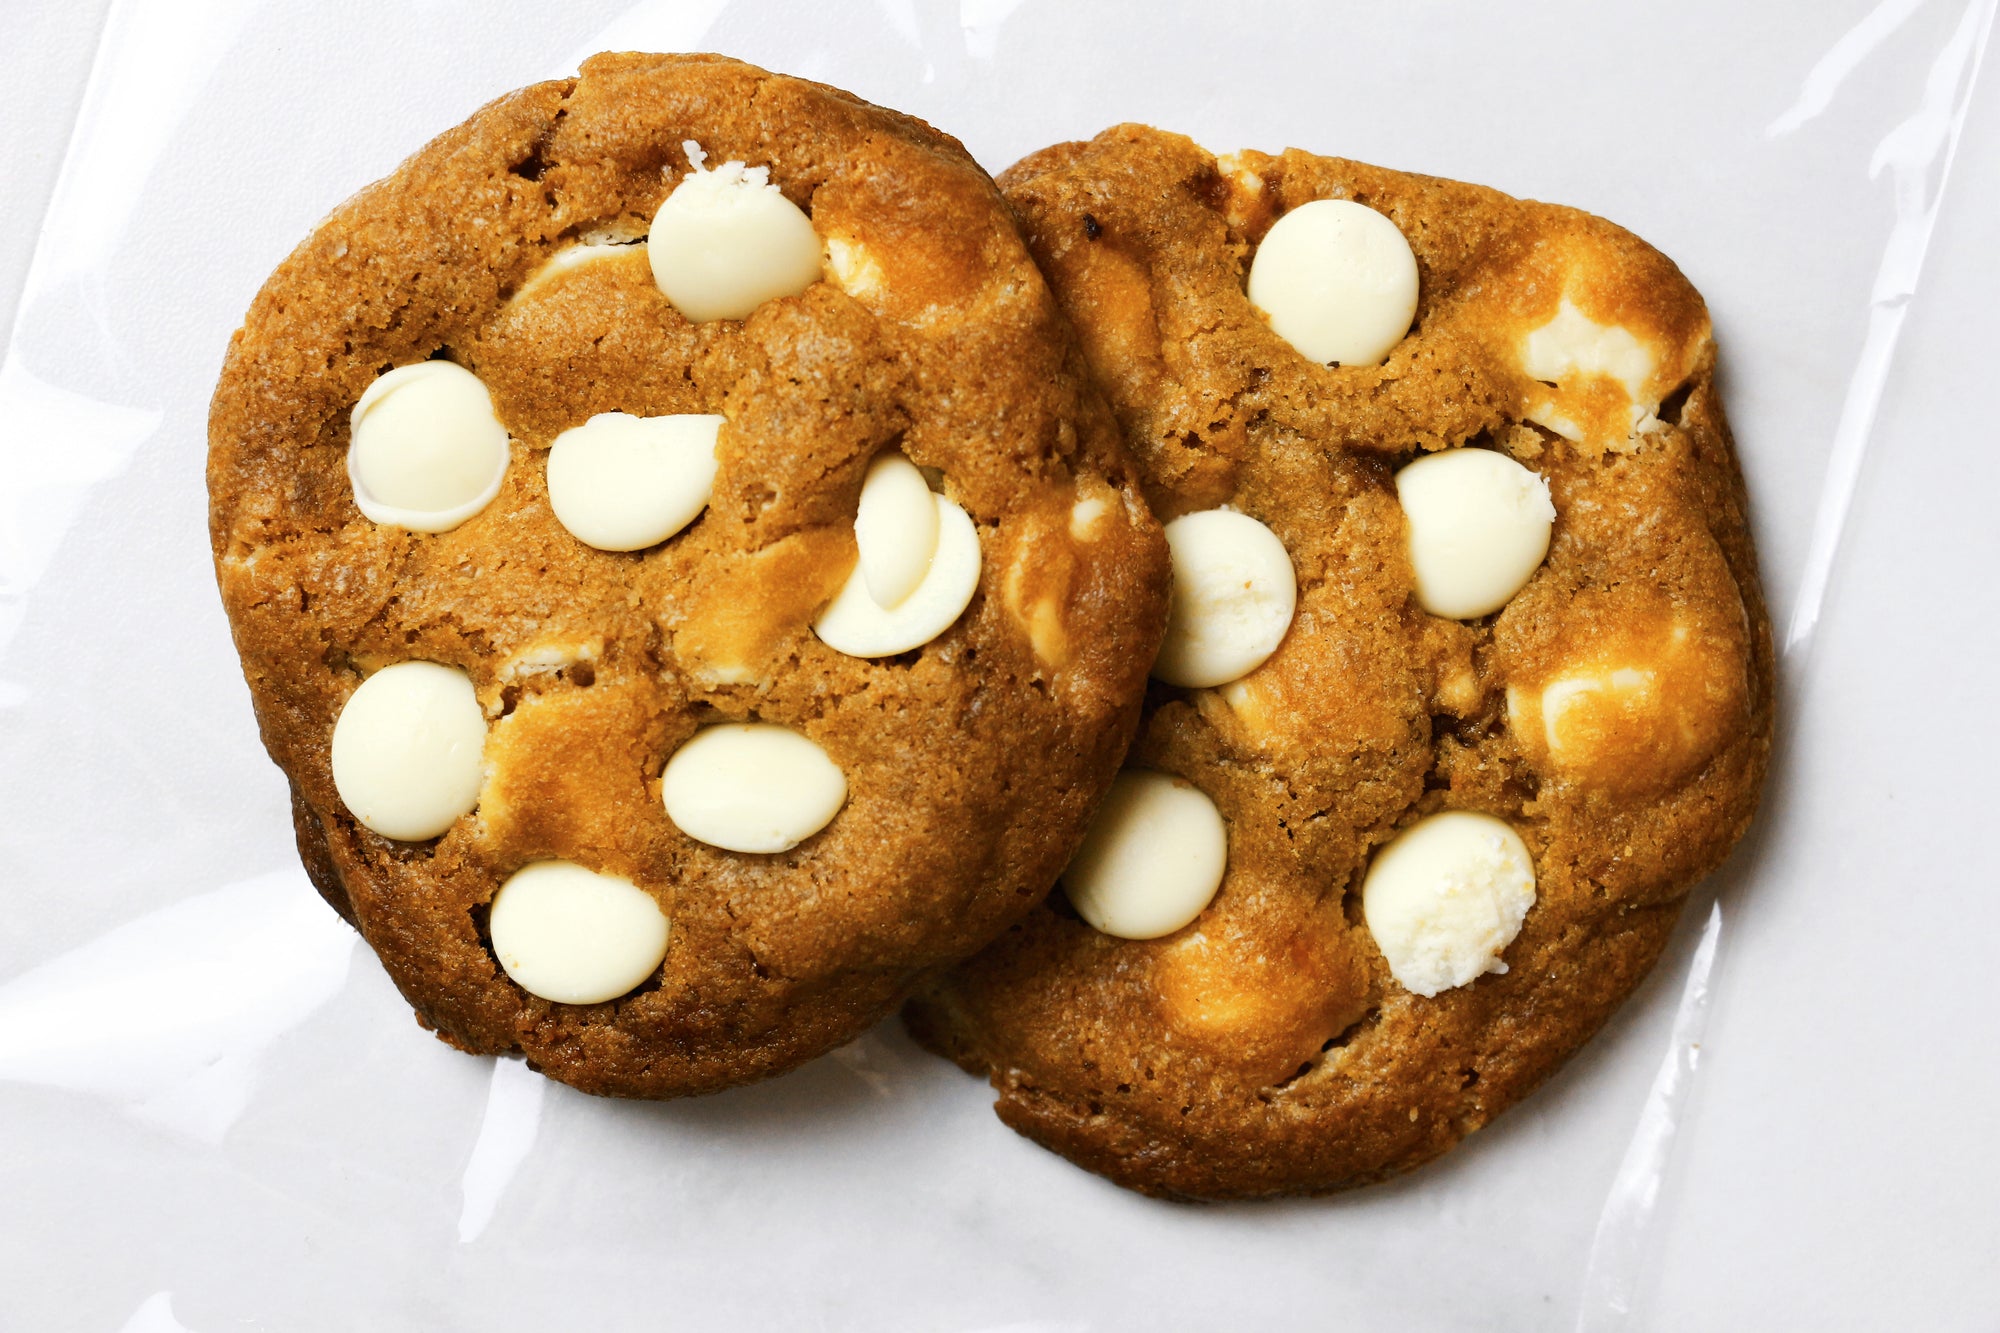 RECIPE: Gula Melaka White Chocolate Cookies—Chewy Caramel Cookies Made By Substituting Brown Sugar With Palm Sugar